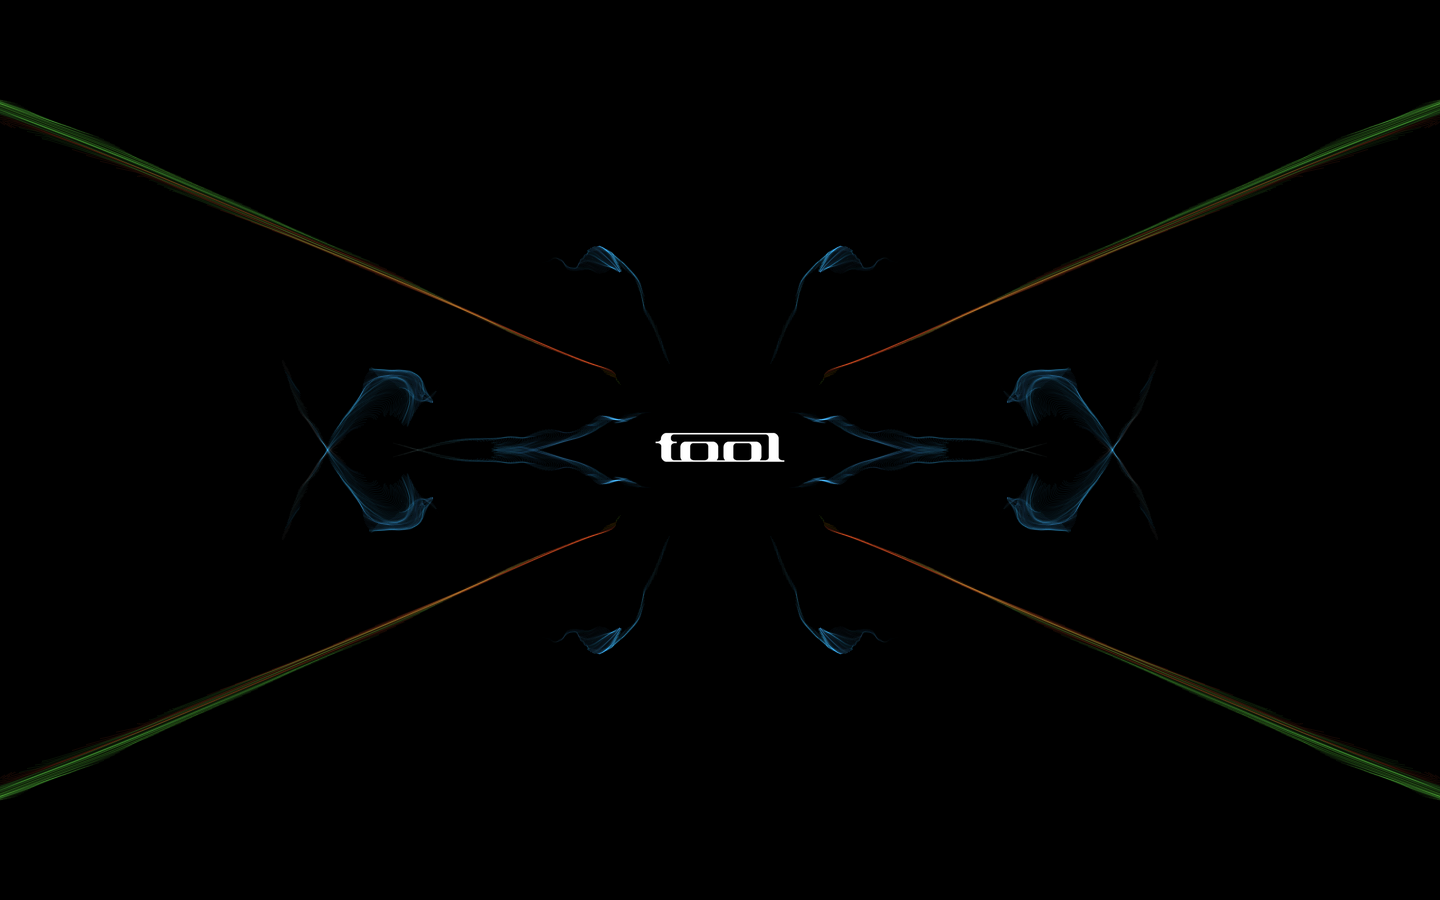 wallpaper download that came with tool aenima album